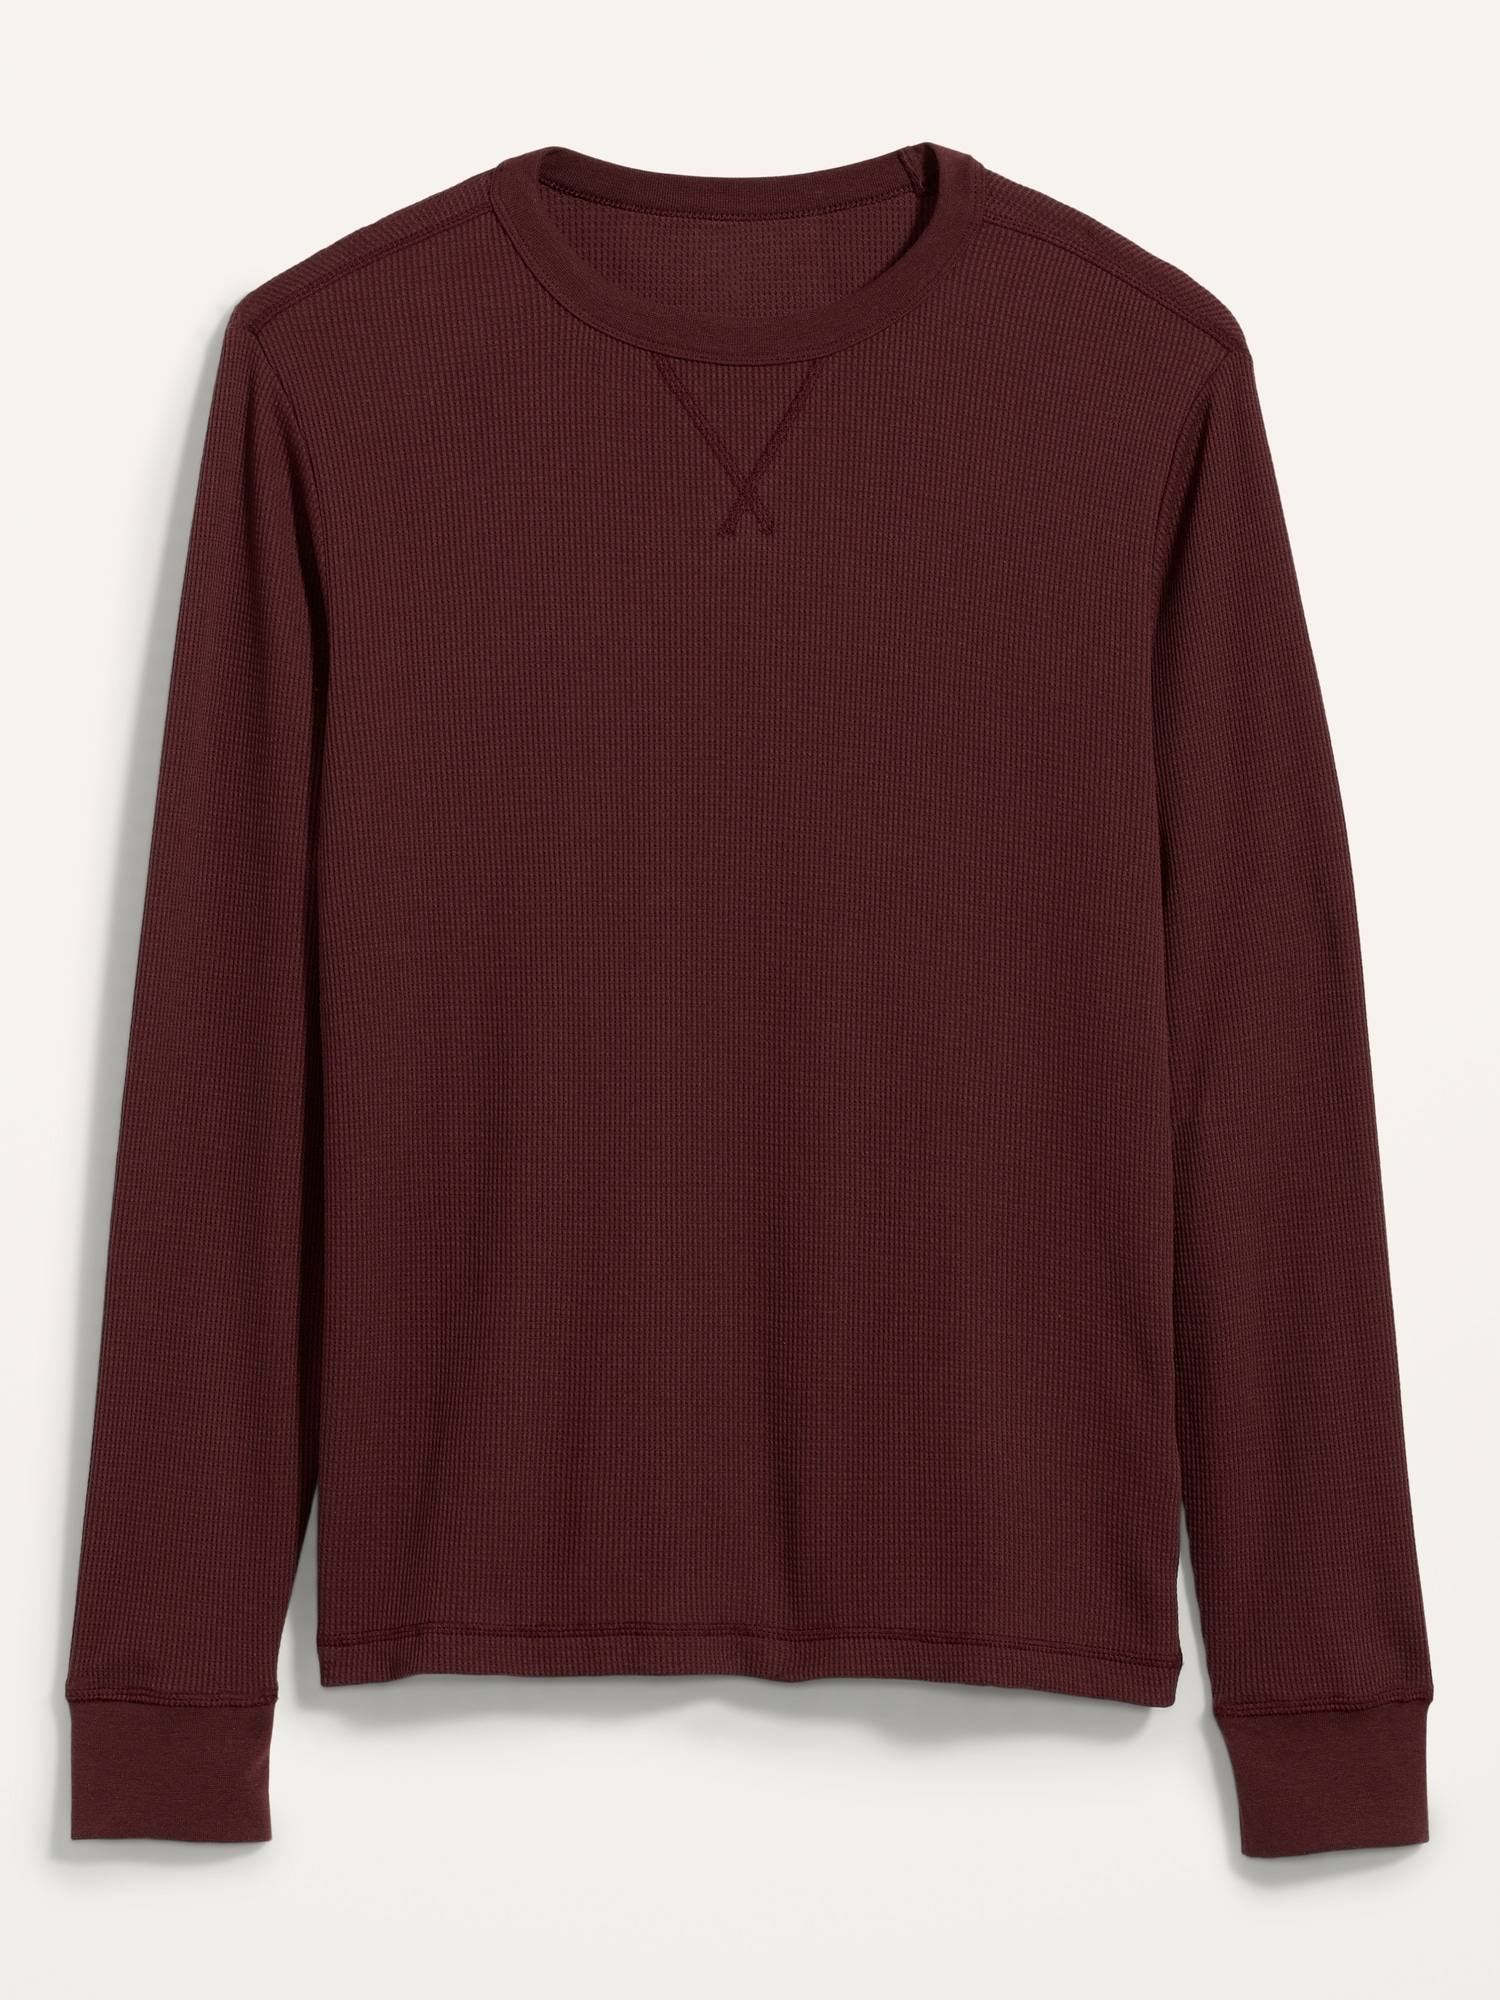 Thermal-Knit Long-Sleeve Tee | Old Navy